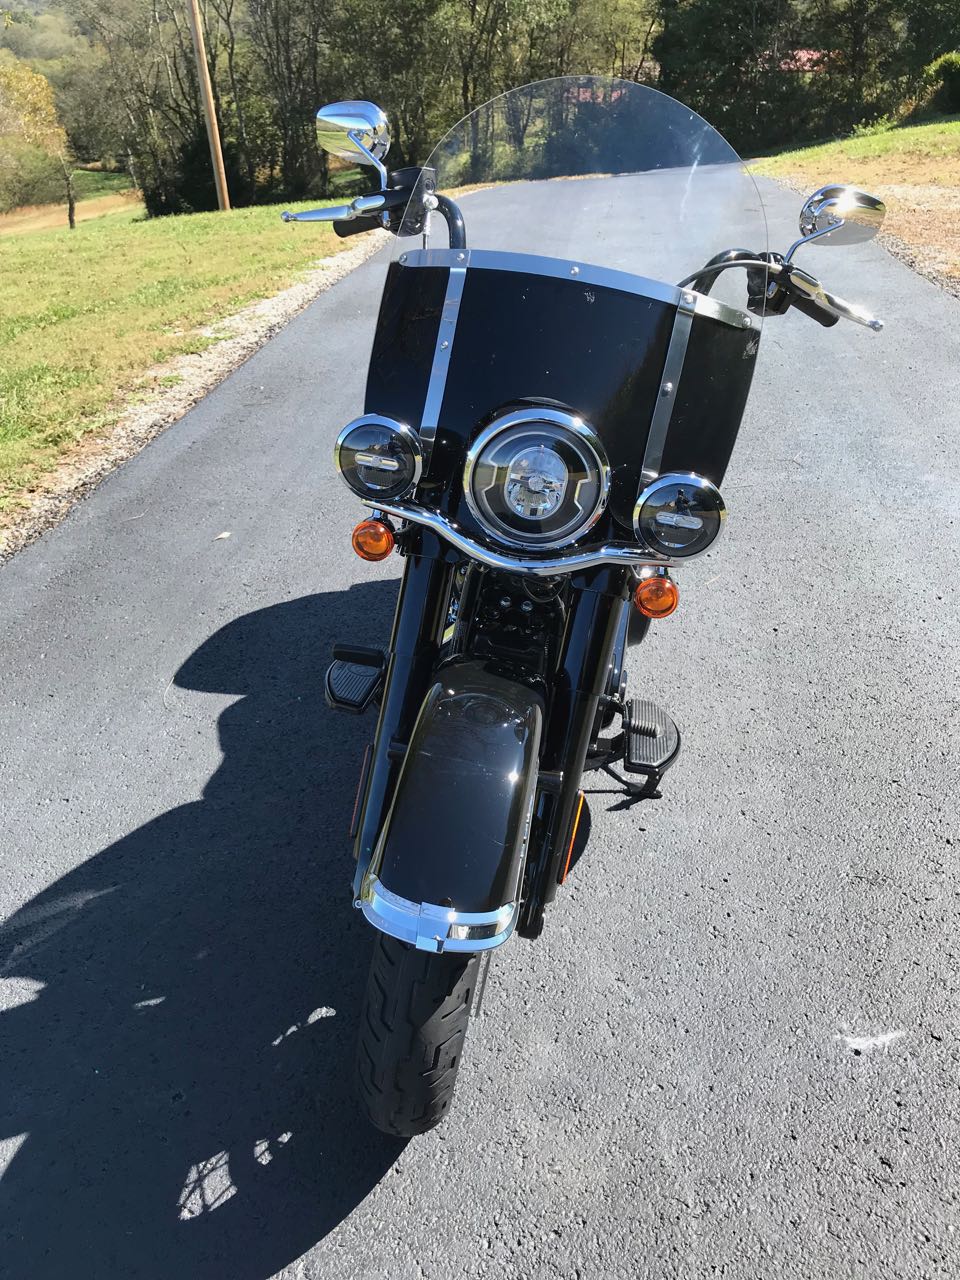 New Windshield Coming For My 2018 Heritage Classic Harley Davidson Forums